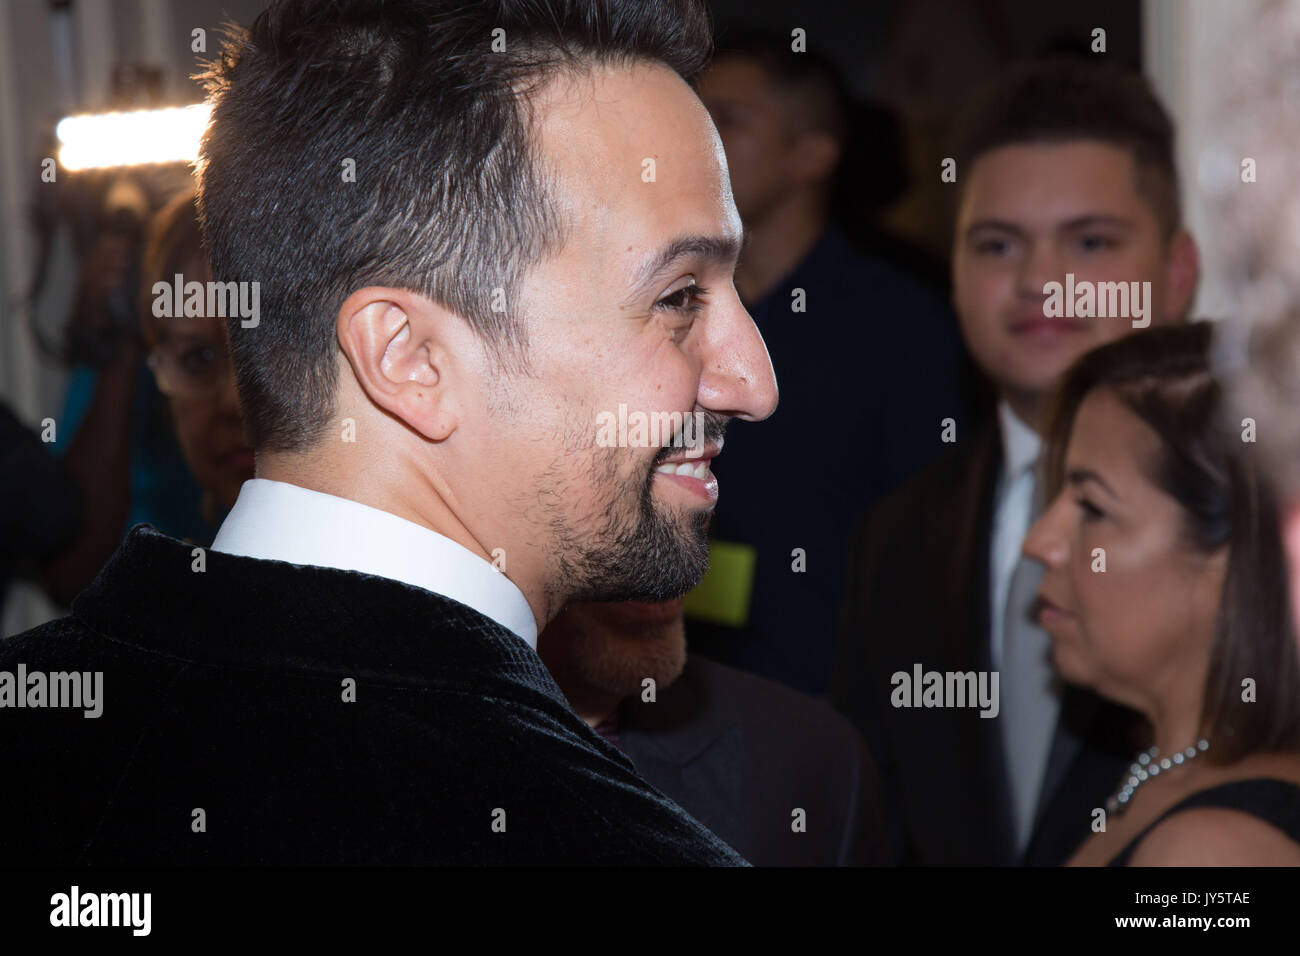 Beverly Hills,California,USA. 18th Aug,2017. Lin-Manuel Miranda attends 32nd Annual Imagen Awards Beverly Wilshire Four Seasons Hotel August 18,2017 Beverly Hills,California. Stock Photo